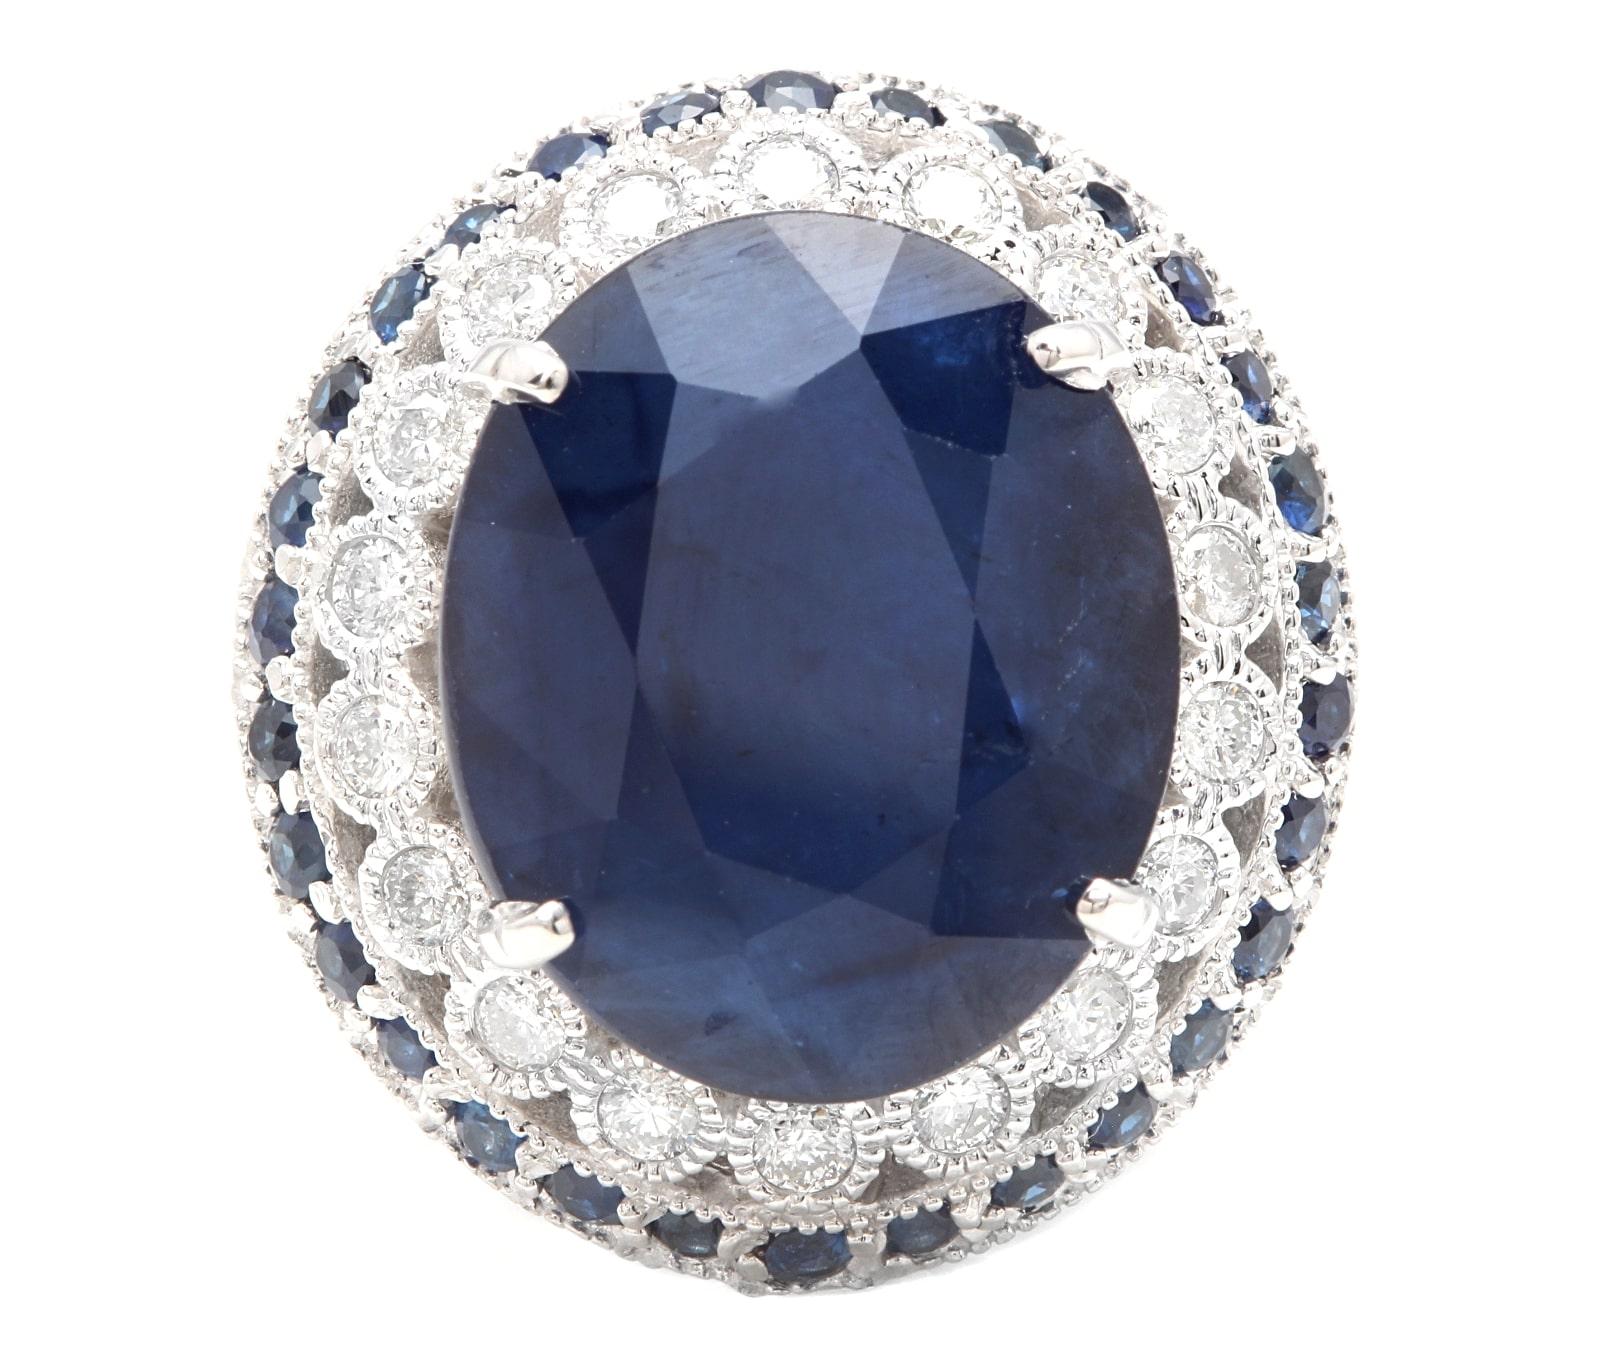 16.80 Carats Exquisite Natural Blue Sapphire and Diamond 14K Solid White Gold Ring

Suggested Replacement Value $6,500.00

Total Blue Sapphire Weight is: Approx. 16.00 Carats (Diffused Treated)

Sapphire Measures: Approx. 16.00 x 13.00mm

Natural